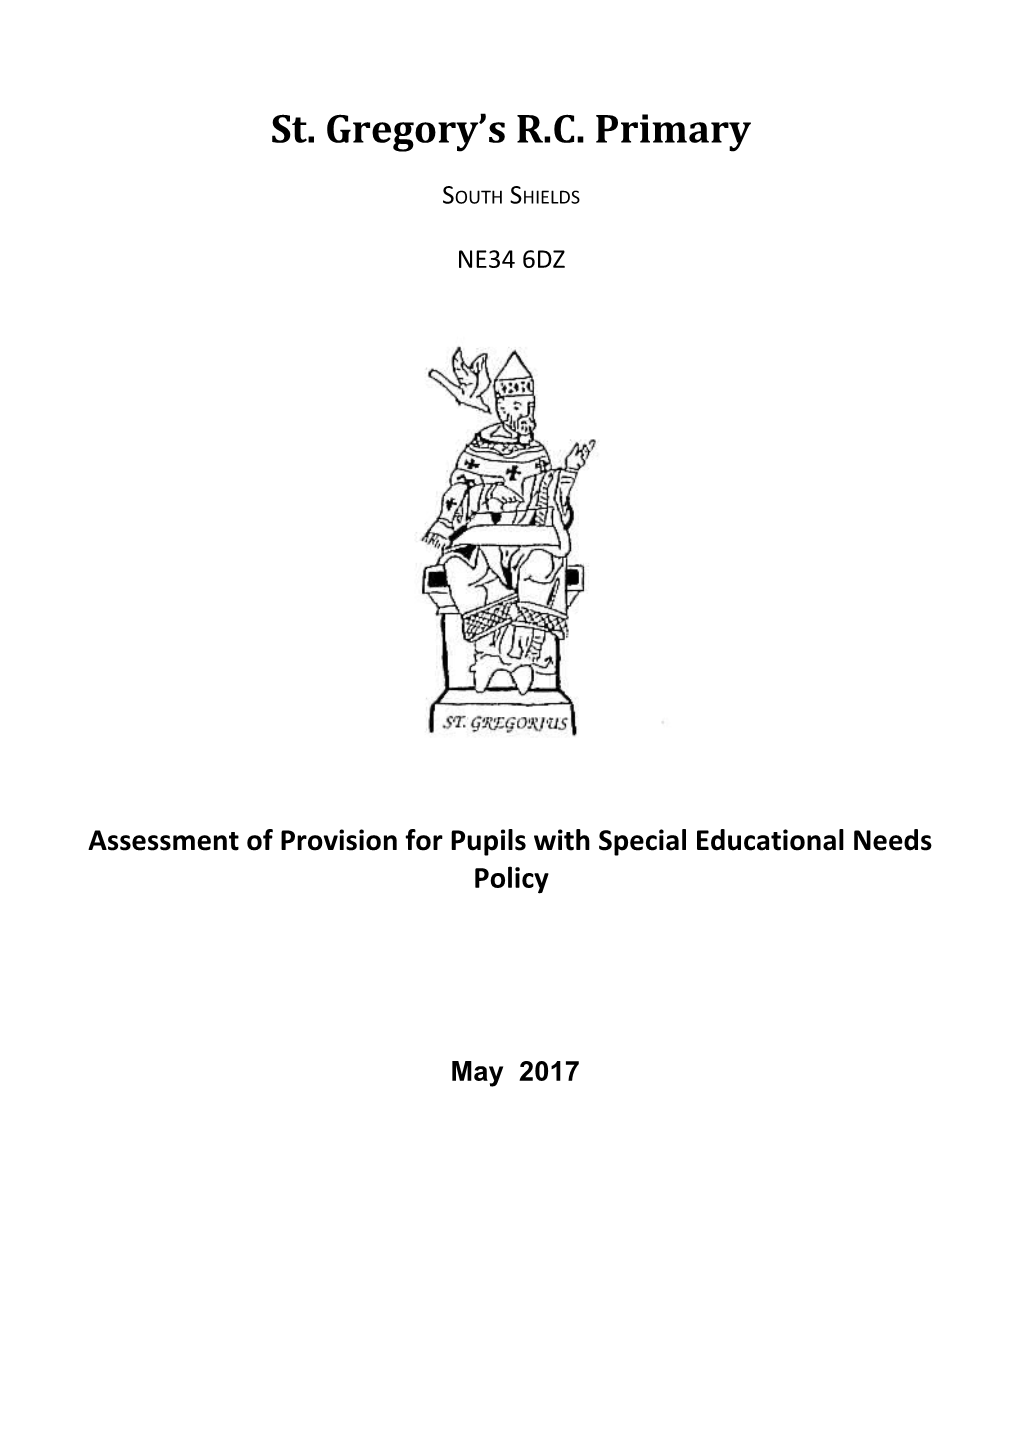 Assessment of Provision for Pupils with Special Educational Needs Policy